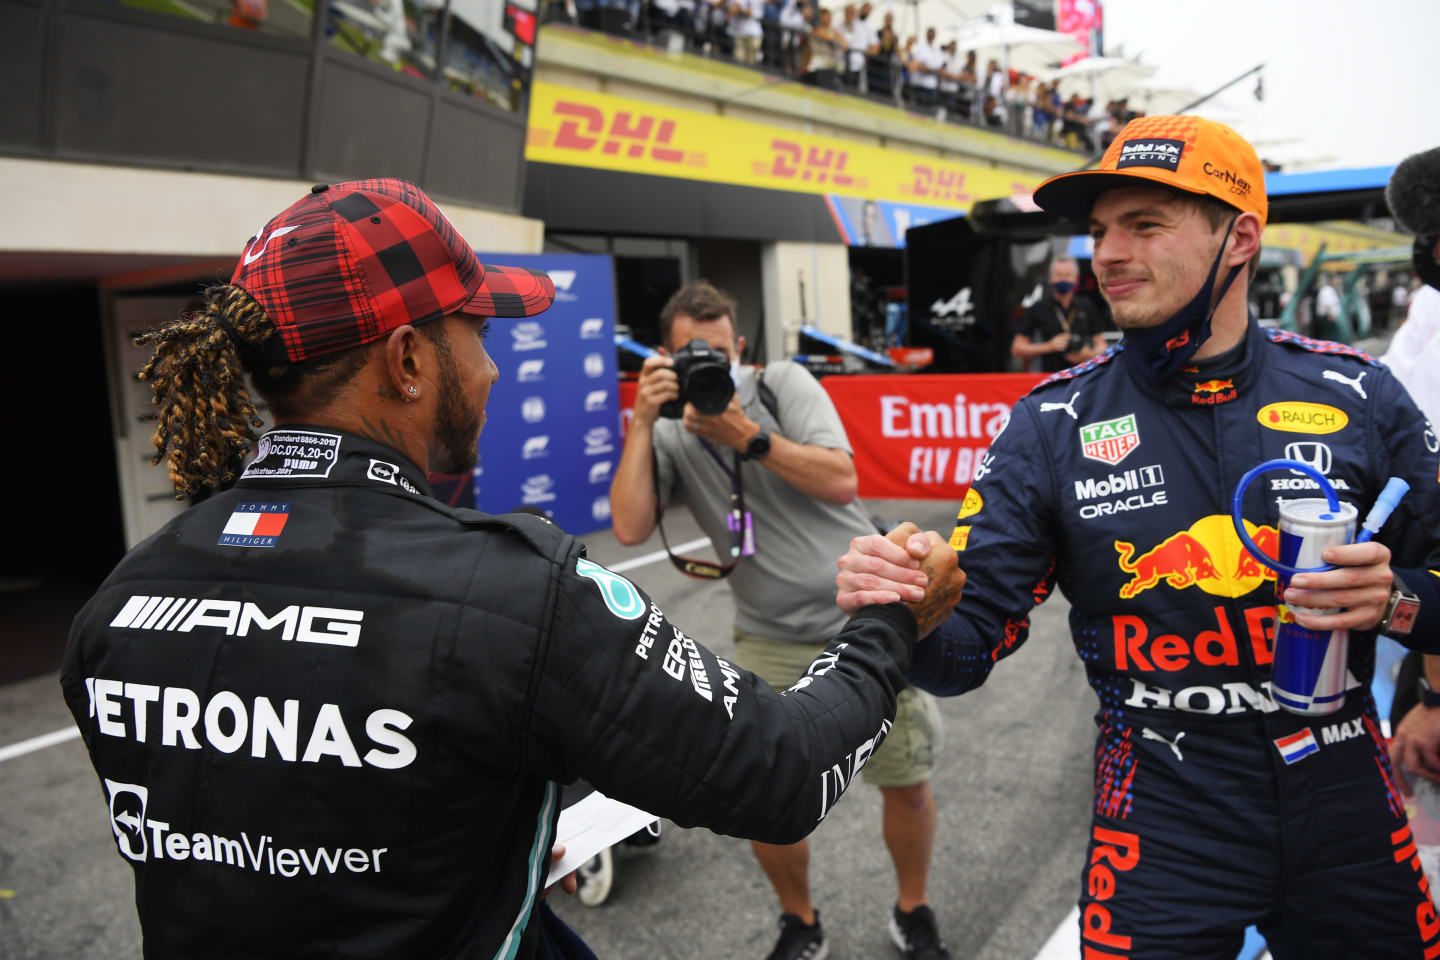 LE CASTELLET, FRANCE - JUNE 19: Pole position qualifier Max Verstappen of Netherlands and Red Bull Racing and second placed qualifier Lewis Hamilton of Great Britain and Mercedes GP interact in parc ferme during qualifying ahead of the F1 Grand Prix of France at Circuit Paul Ricard on June 19, 2021 in Le Castellet, France. (Photo by Nicolas Tucat - Pool/Getty Images)